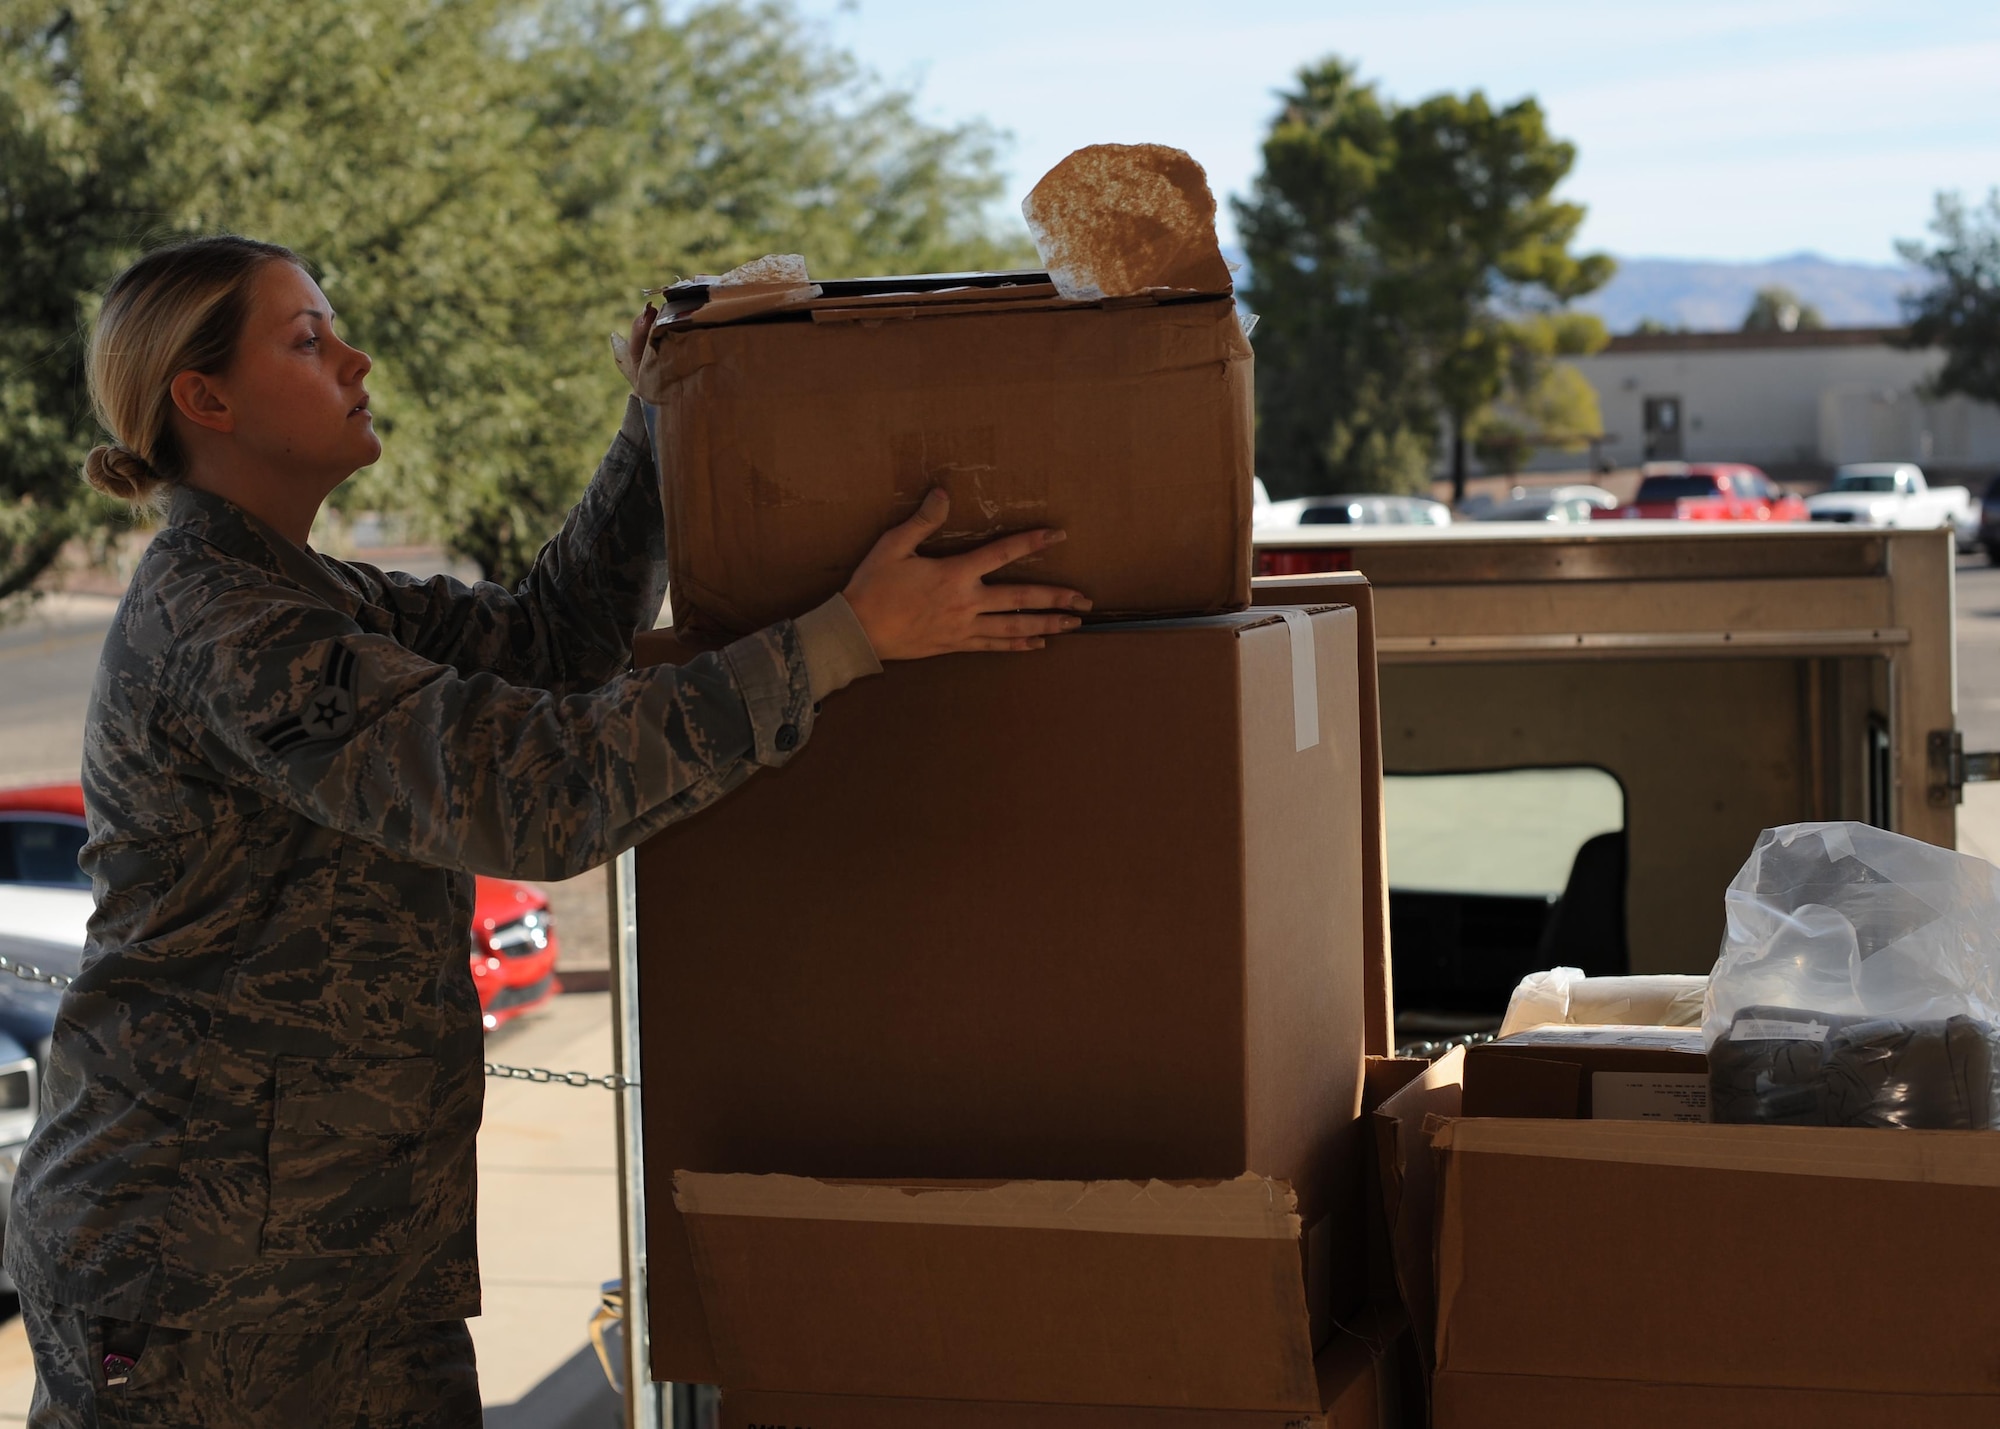 U.S. Air Force Airman 1st Class Katherine Street, 355th Logistics Readiness Squadron vehicle operator, receives packages for delivery at Davis-Monthan Air Force Base, Ariz., Dec. 14, 2016. Once supplies are delivered to the installation, LRS distributes them to individual units across the base allowing supplies to be readily available. (U.S. Air Force photo by Senior Airman Ashley N. Steffen)